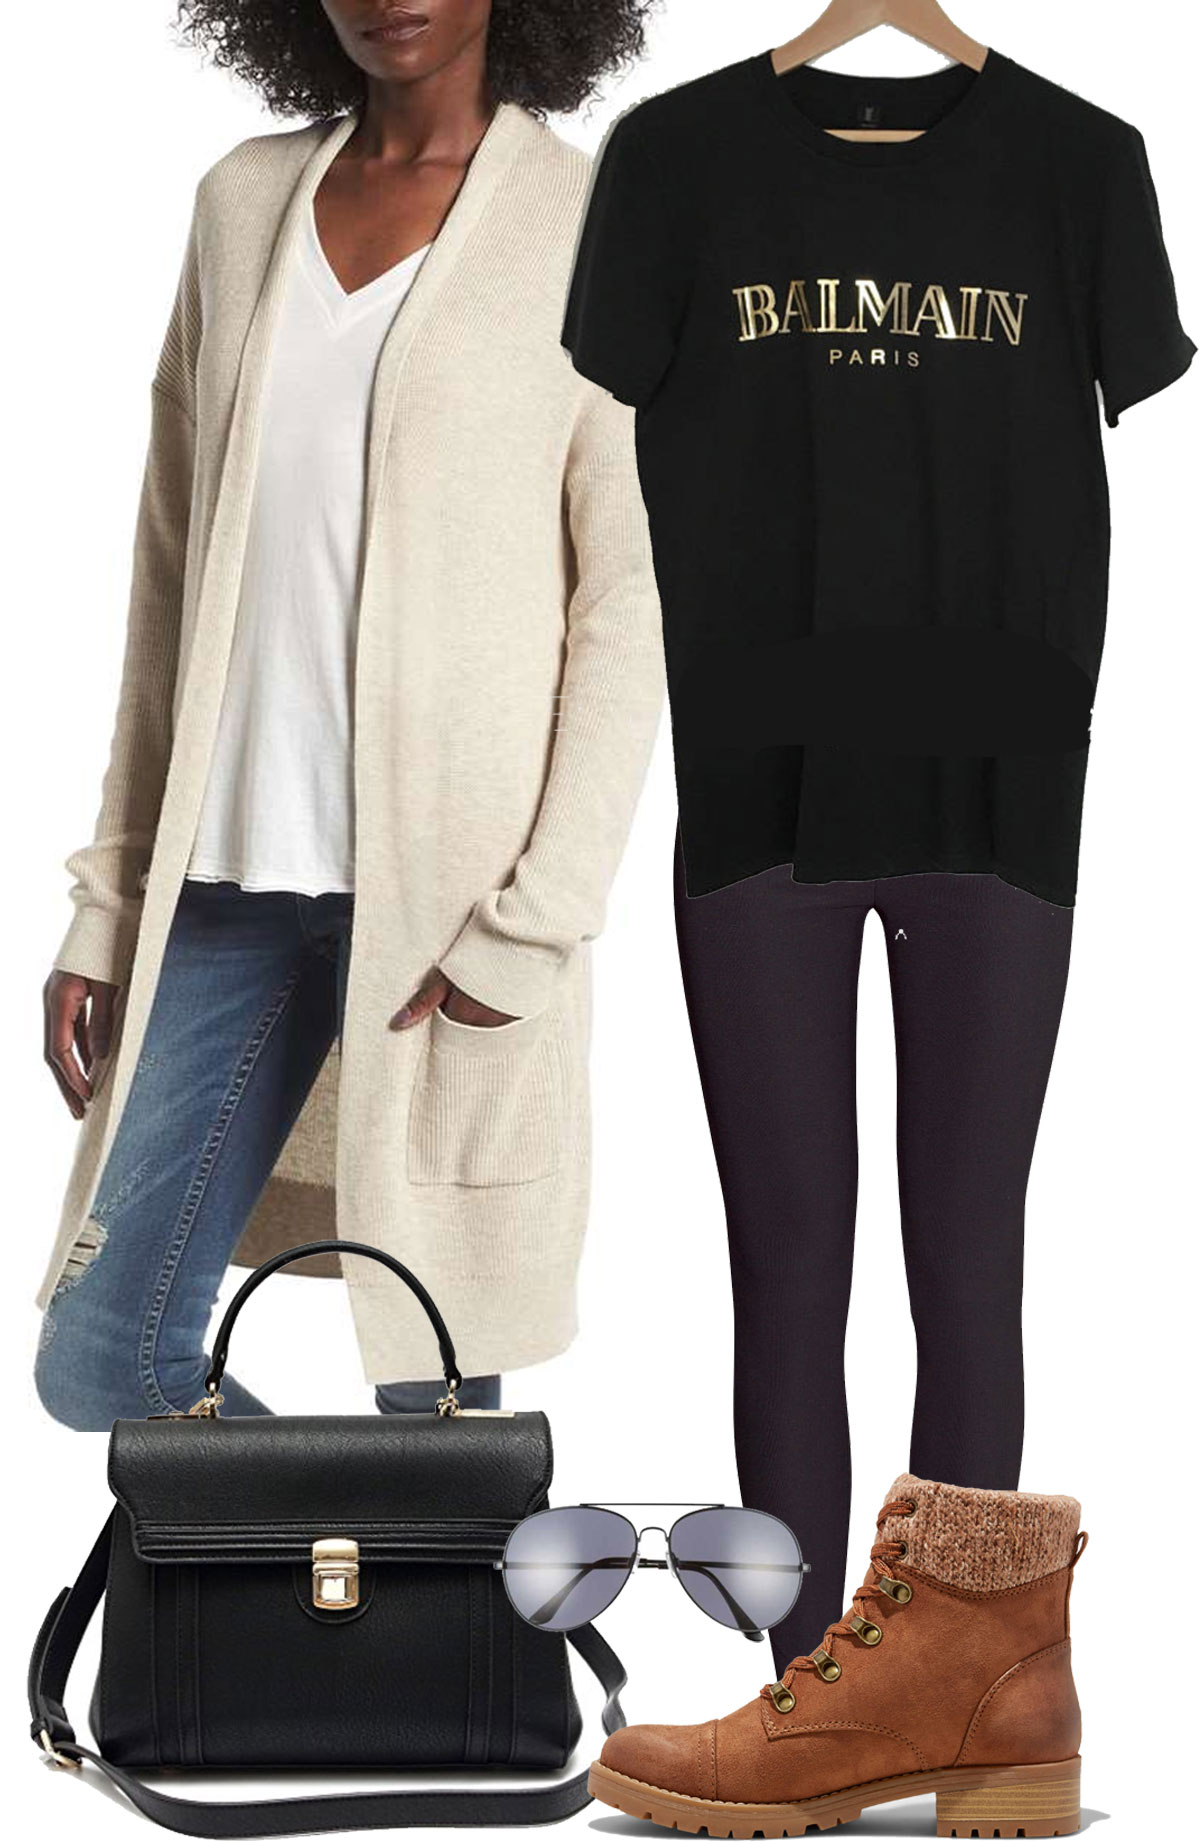 Dorothy Wang wears a gold foil Balmain tee with leggings, hiking boots and a beige cardigan.